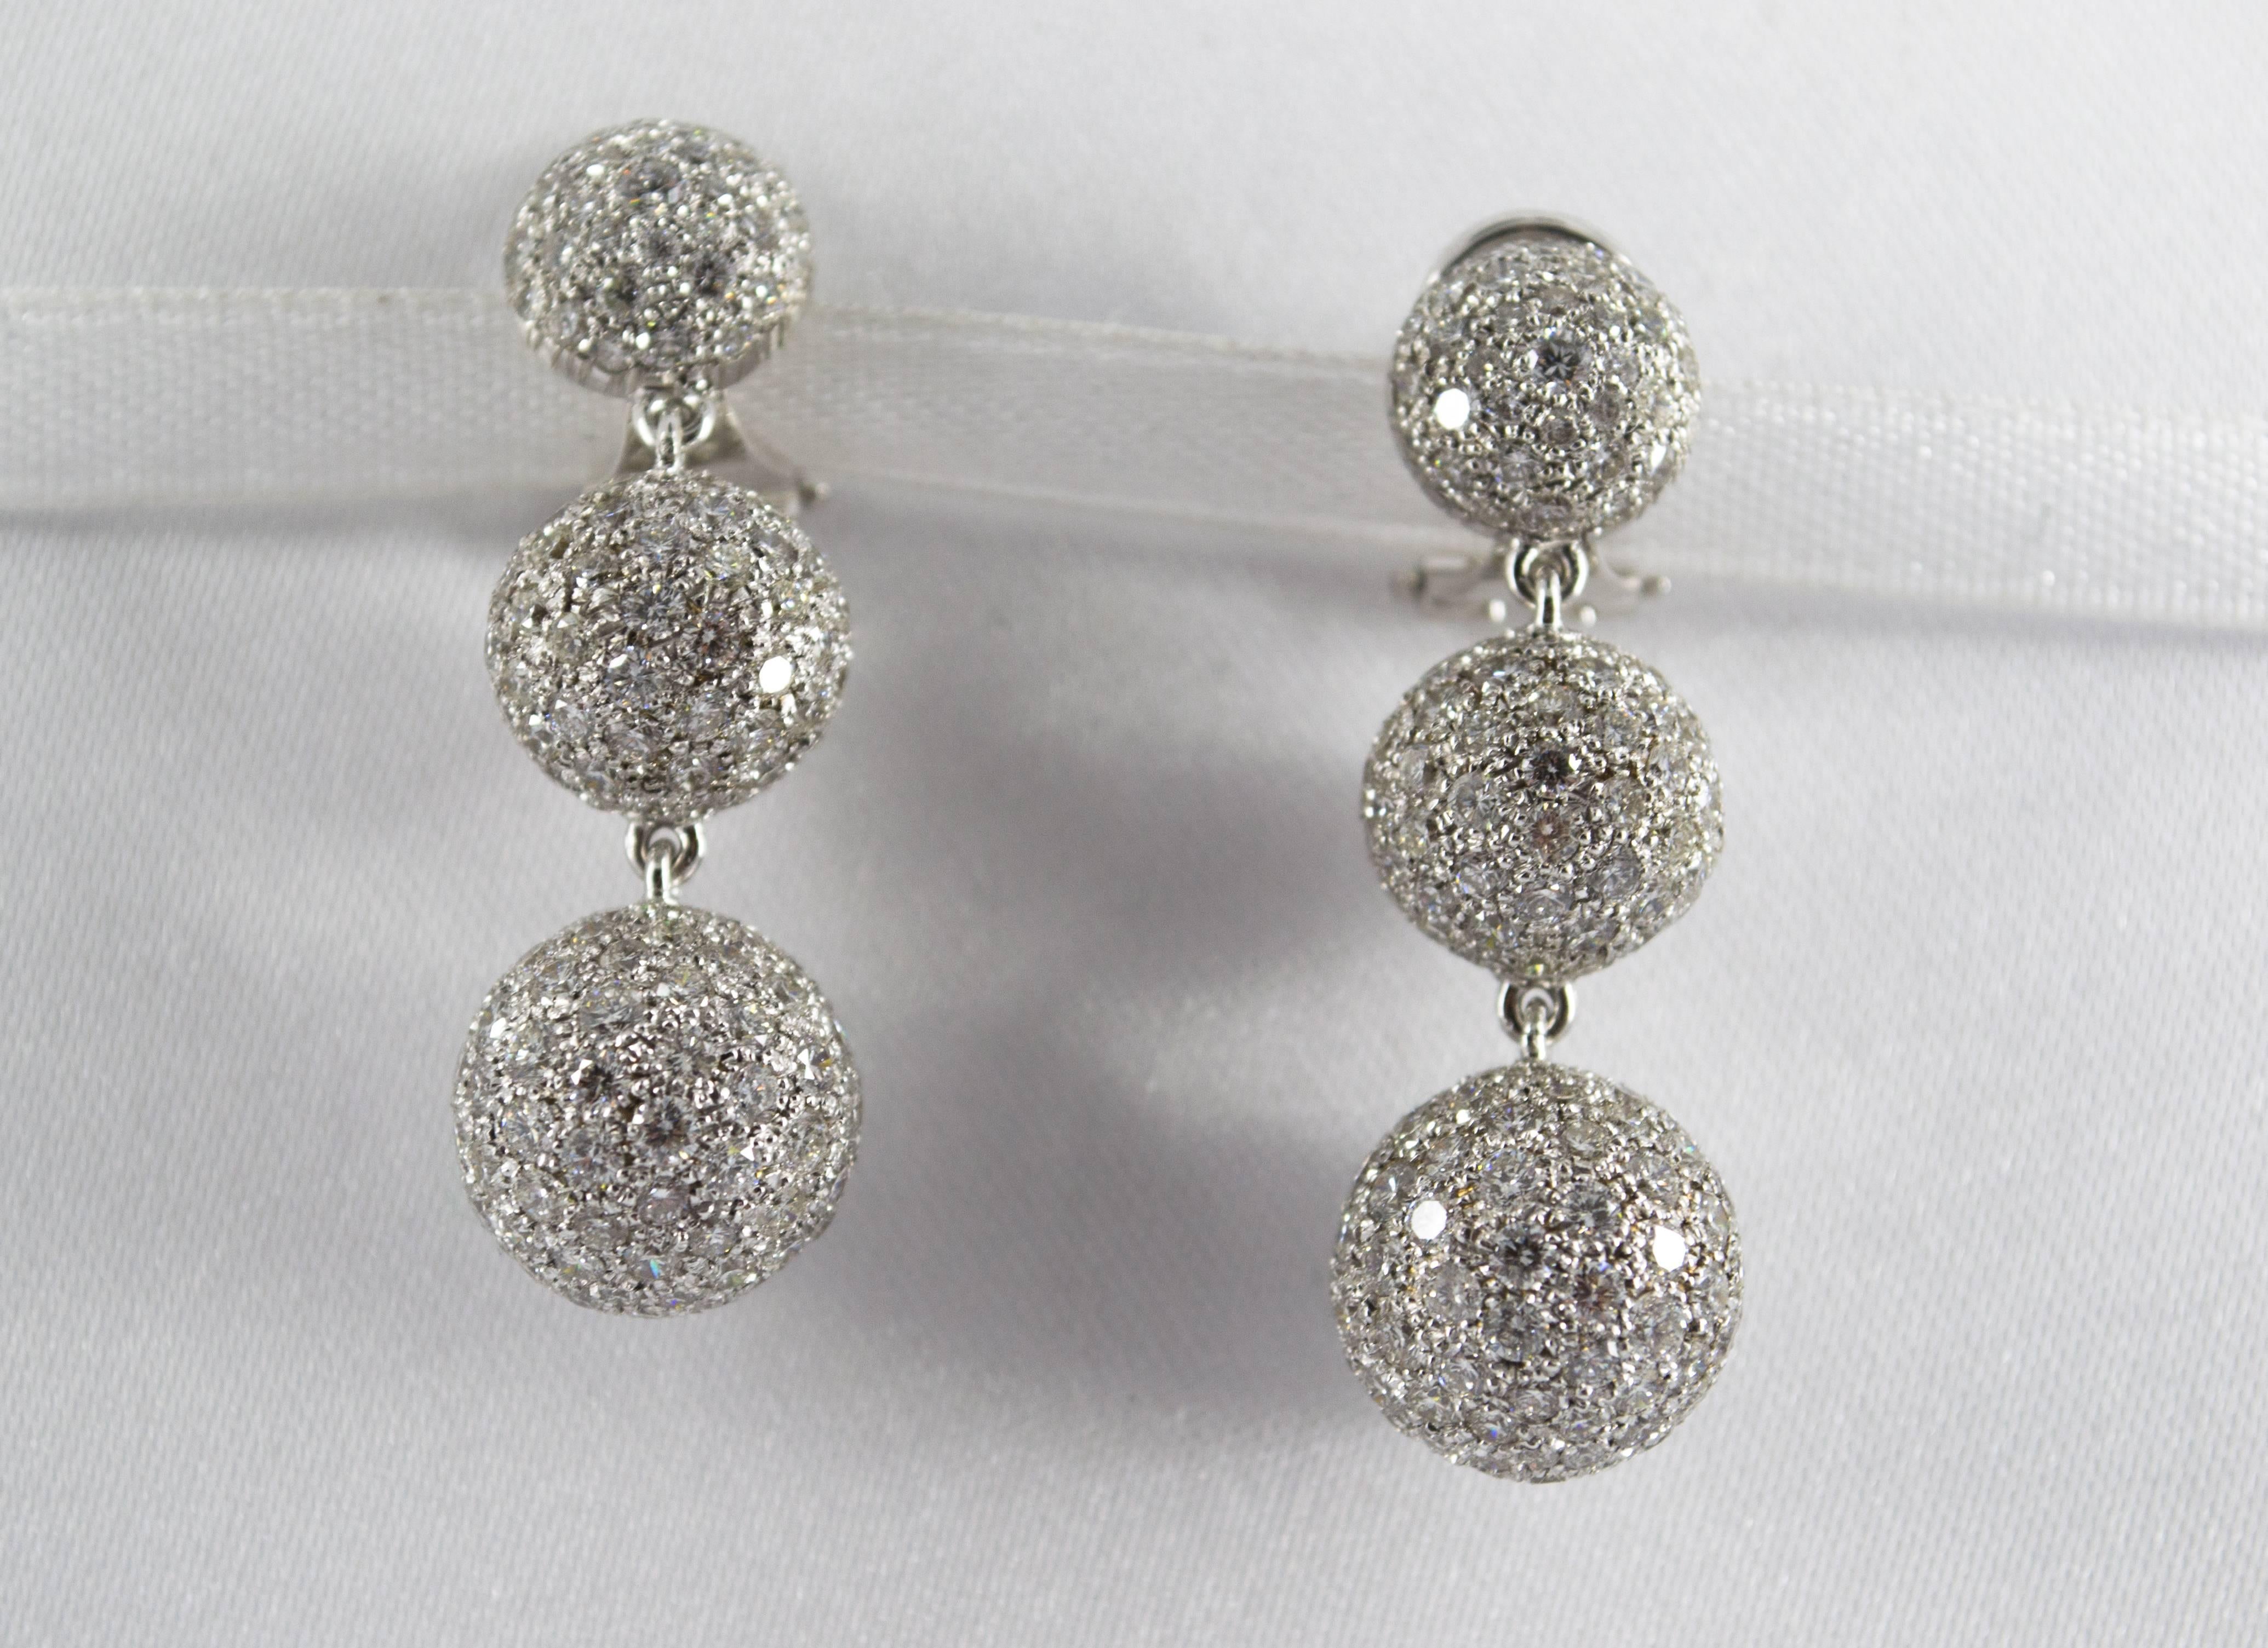 These Earrings are made of 18K White Gold.
These Earrings have 8.35 Carats of White Diamonds.
All our Earrings have pins for pierced ears but we can change the closure and make any of our Earrings suitable even for non-pierced ears.
We're a workshop